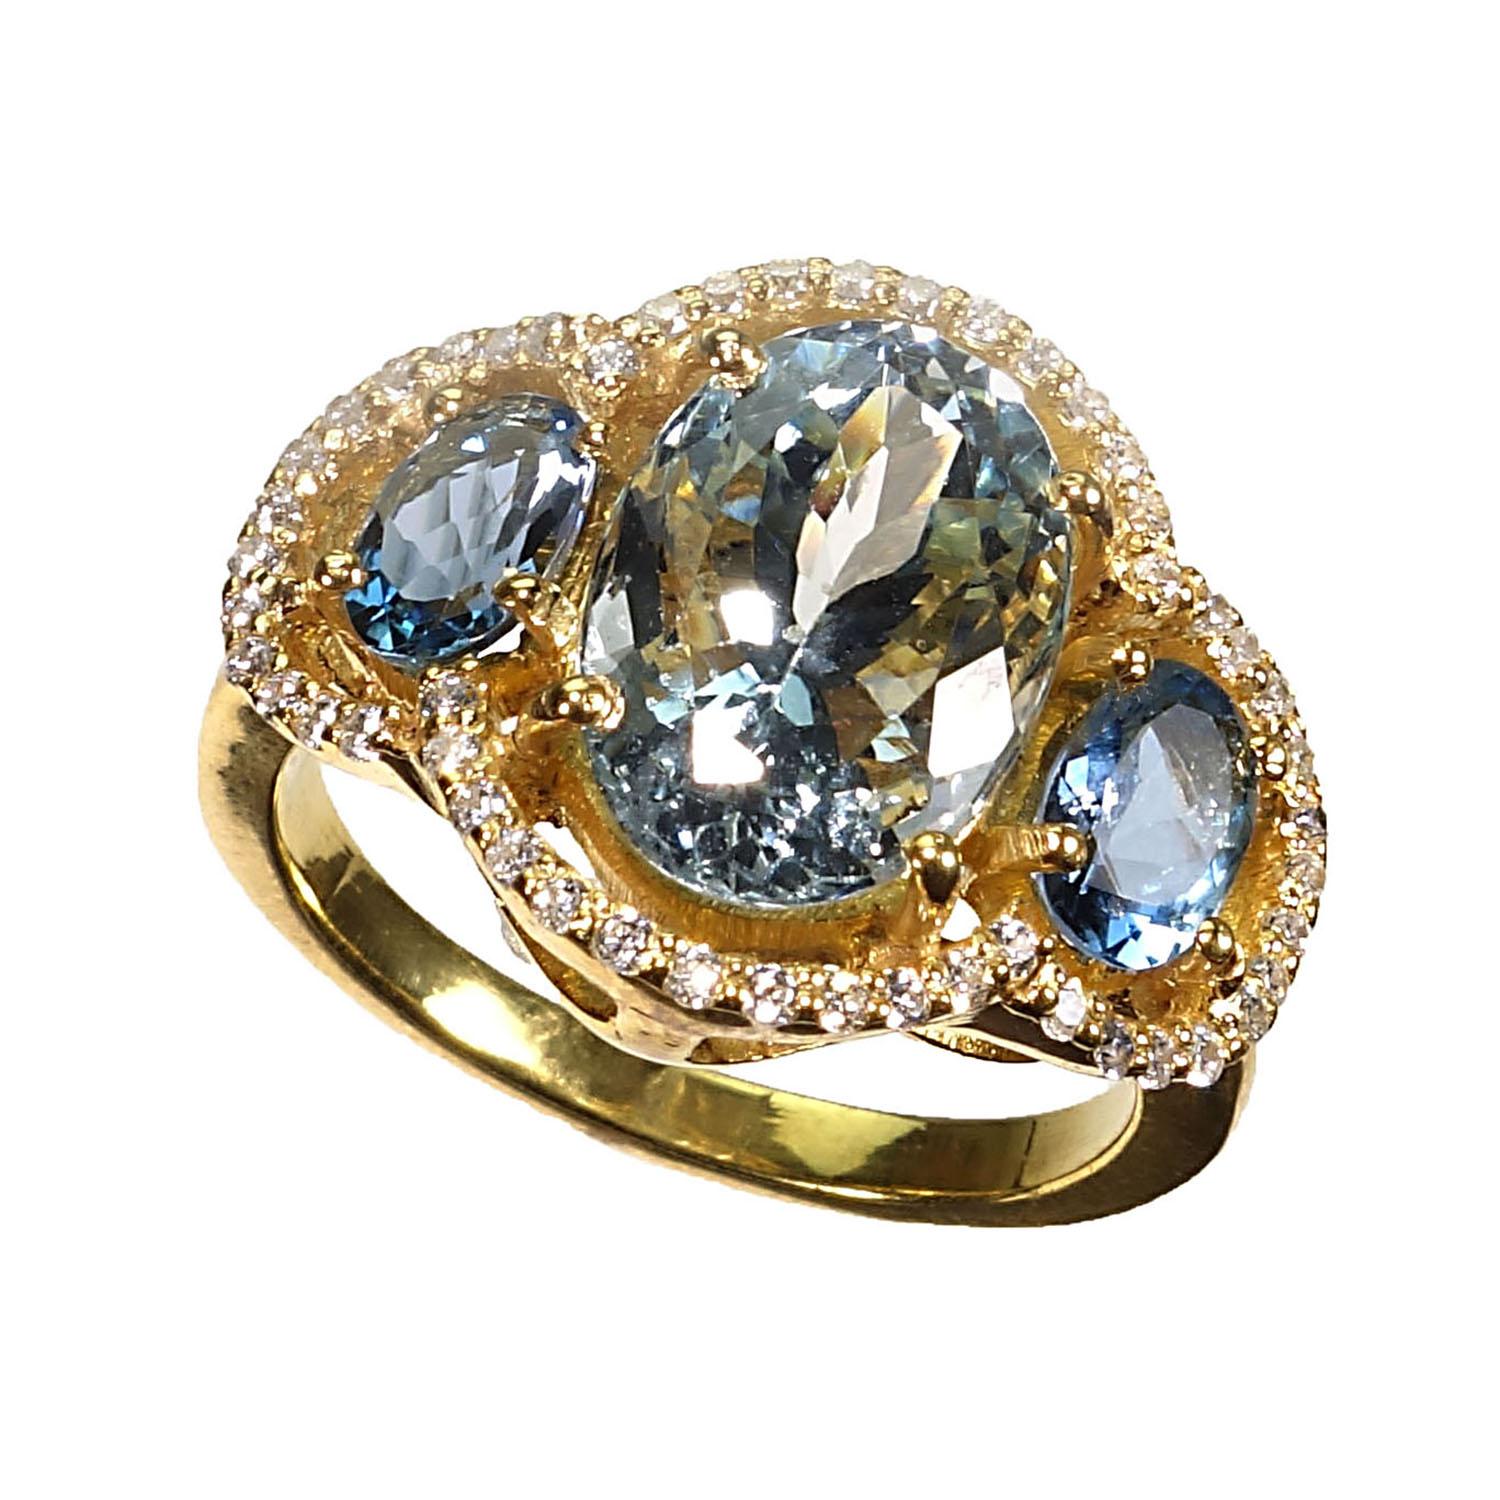 Custom made, glittering ring of oval Aquamarines halo set with Cambodian Zircons in glowing 14K yellow gold rhodium on Sterling Silver. One sparkling oval Aquamarine is flanked by two slightly darker oval Aquamarines. All three are surrounded by